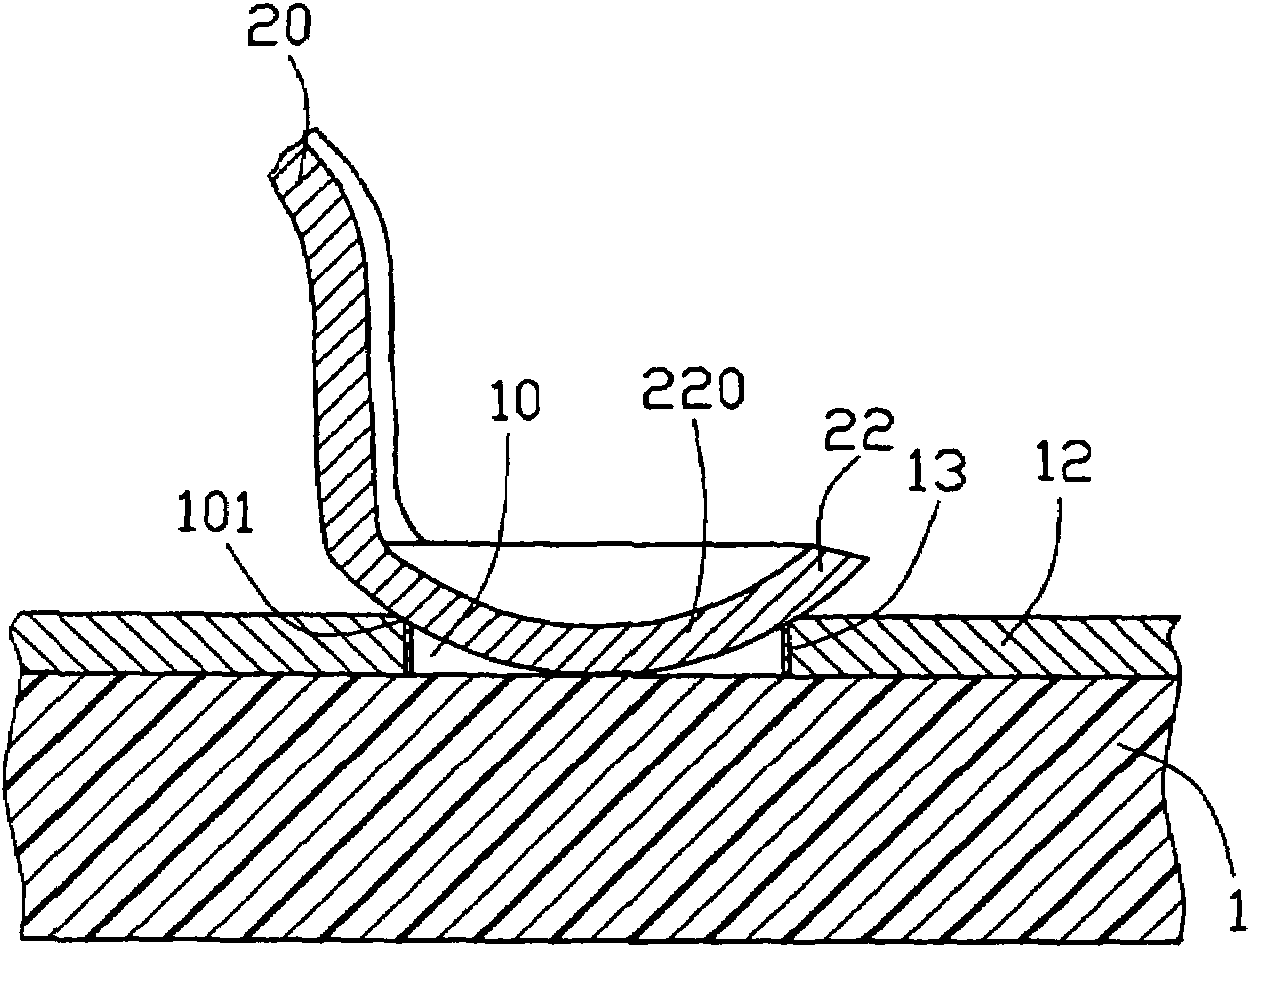 Electrical connector with contact